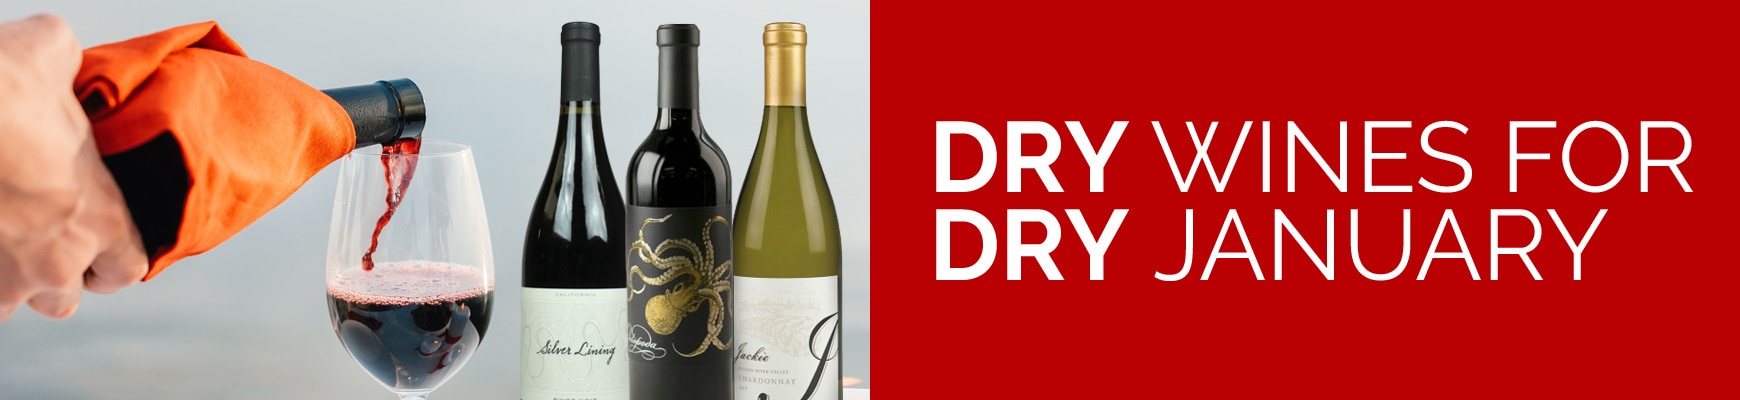 Dry Wines for Dry January